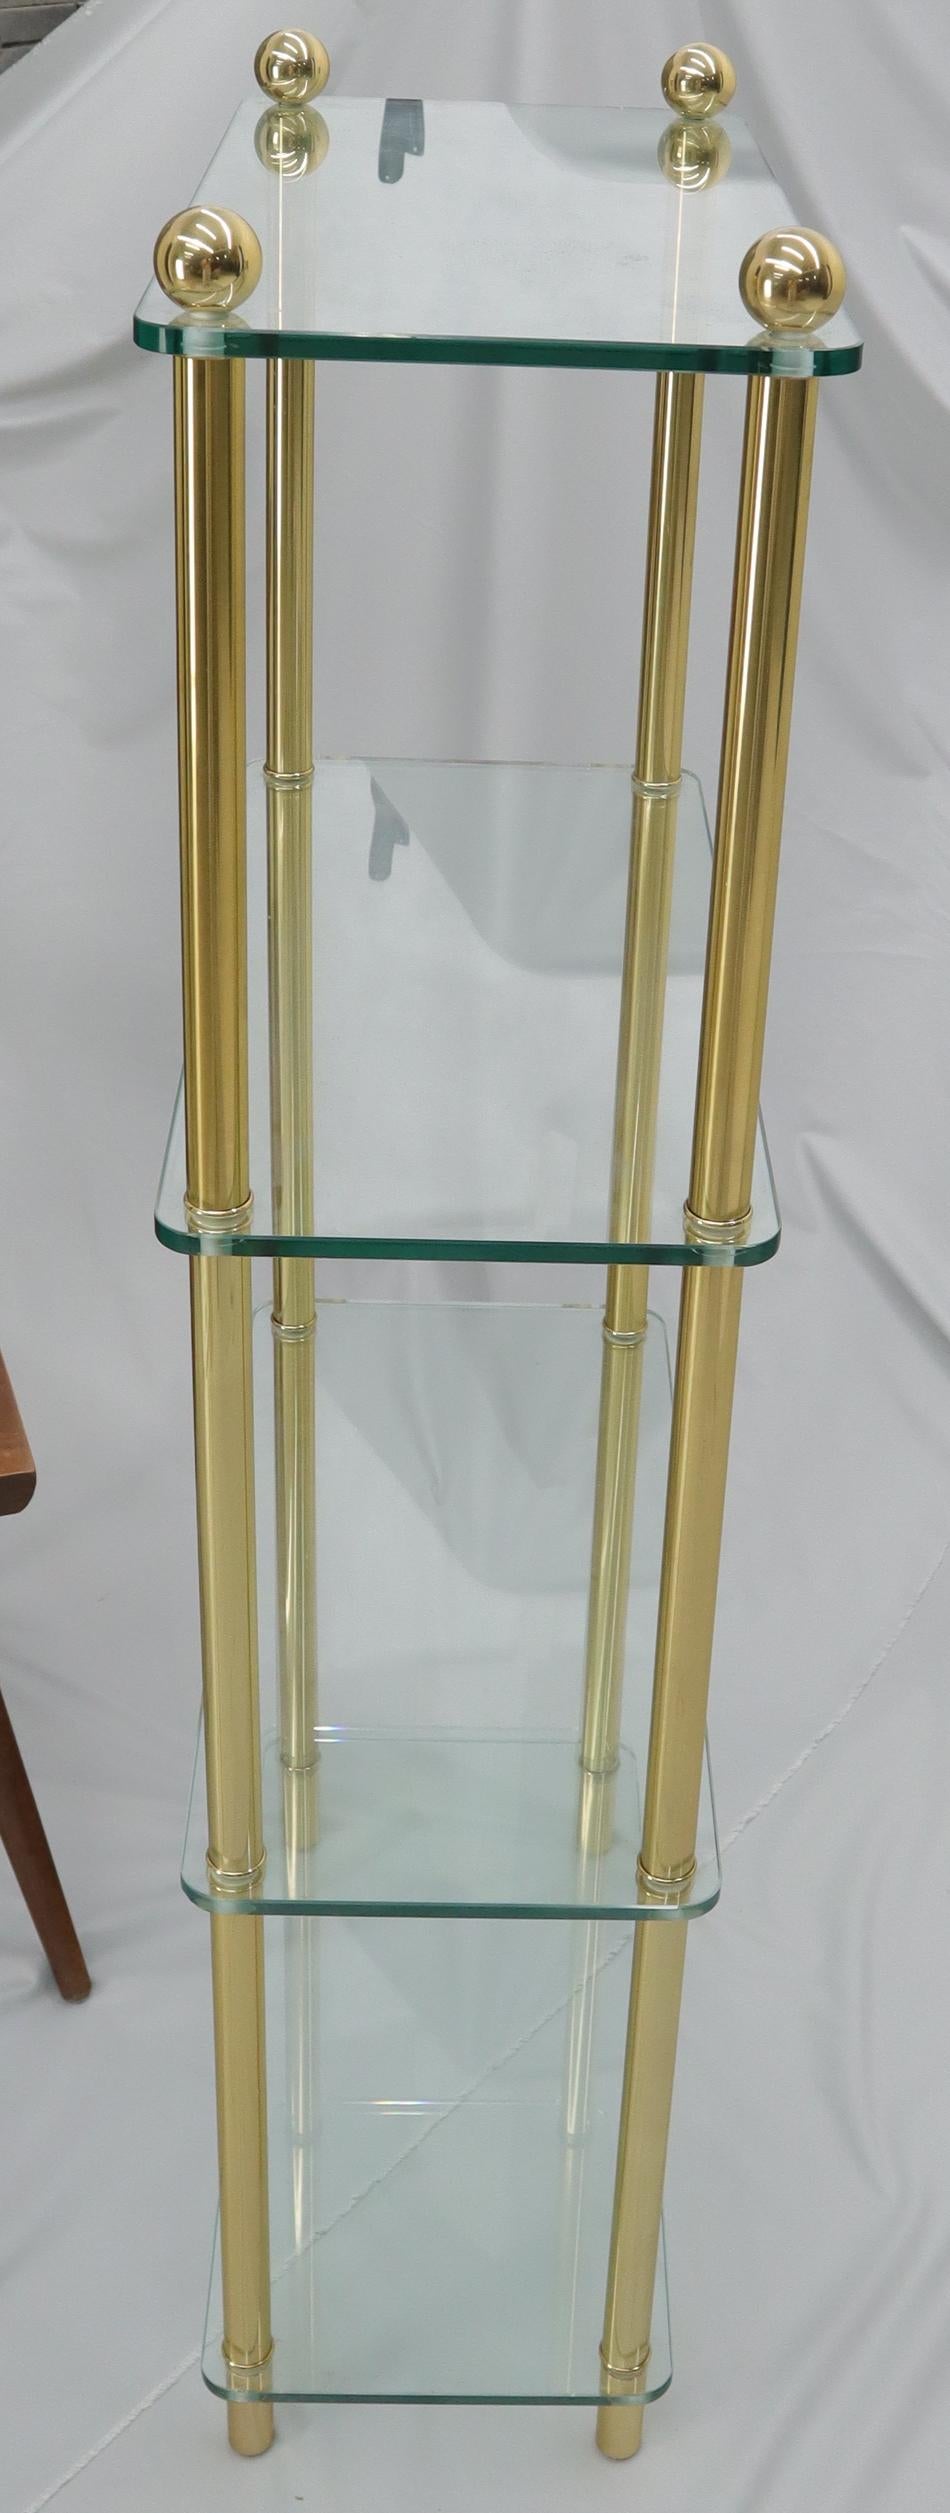 Petit Compact Class and Brass 4-Tier Étagère Shelf Bookcase In Excellent Condition For Sale In Rockaway, NJ